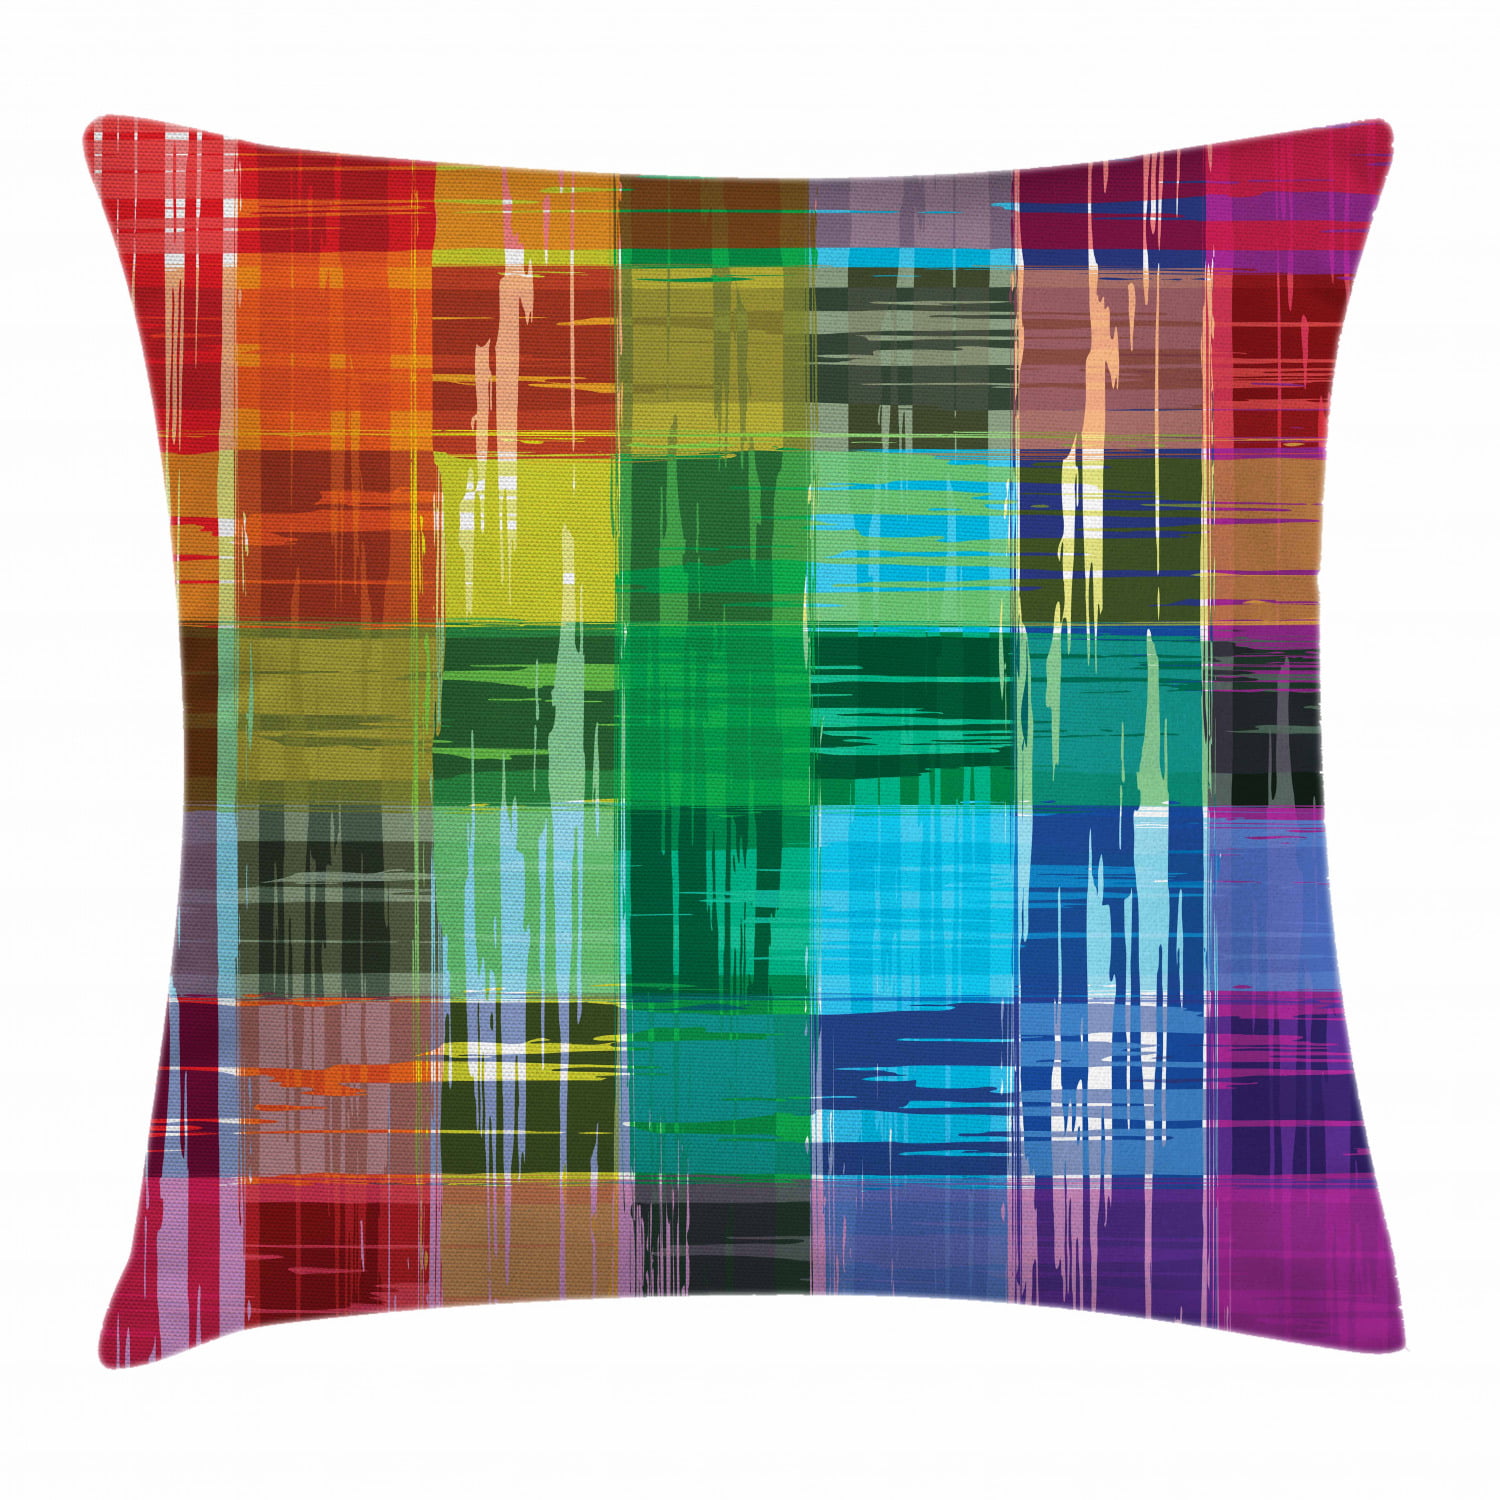 Decorative Square Accent Pillow Case 18 X 18 Ambesonne Abstract Throw Pillow Cushion Cover Rainbow Color Multicolored Expressionist Work of Art Vibrant Rainbow Design Tainted Pattern